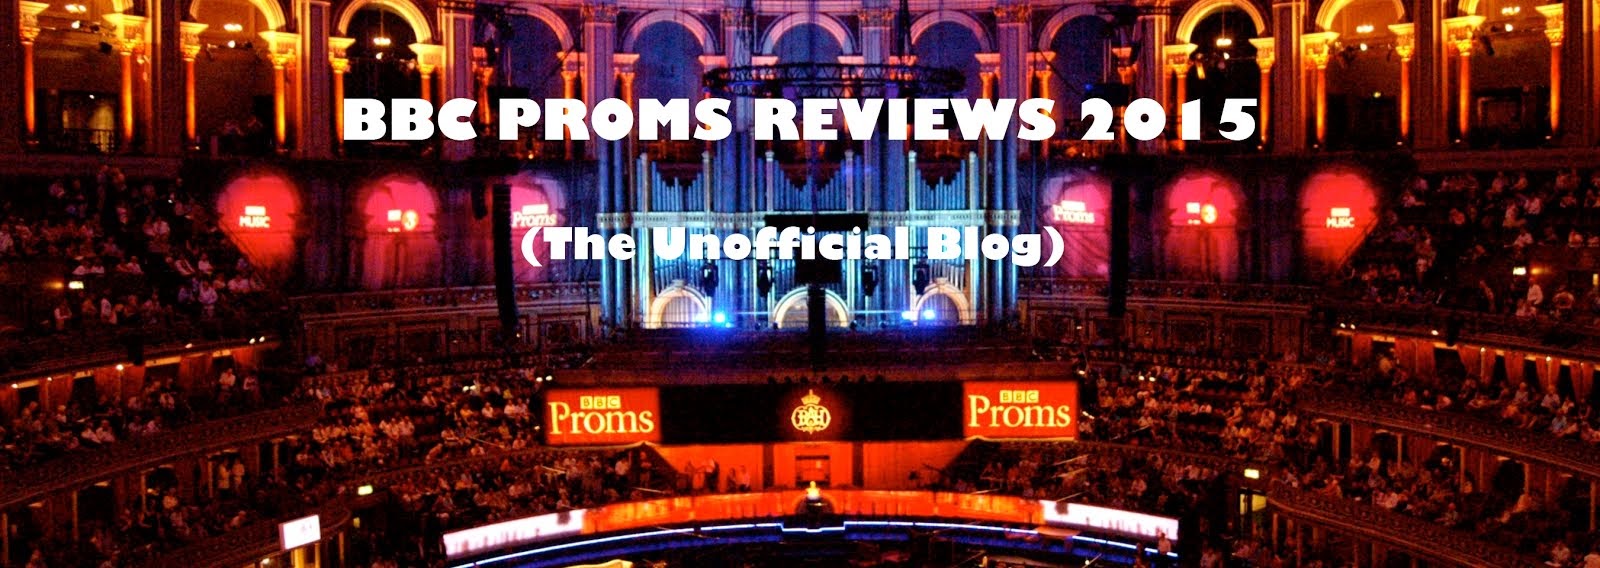 BBC PROMS REVIEWS 2015 THE UNOFFICIAL BLOG